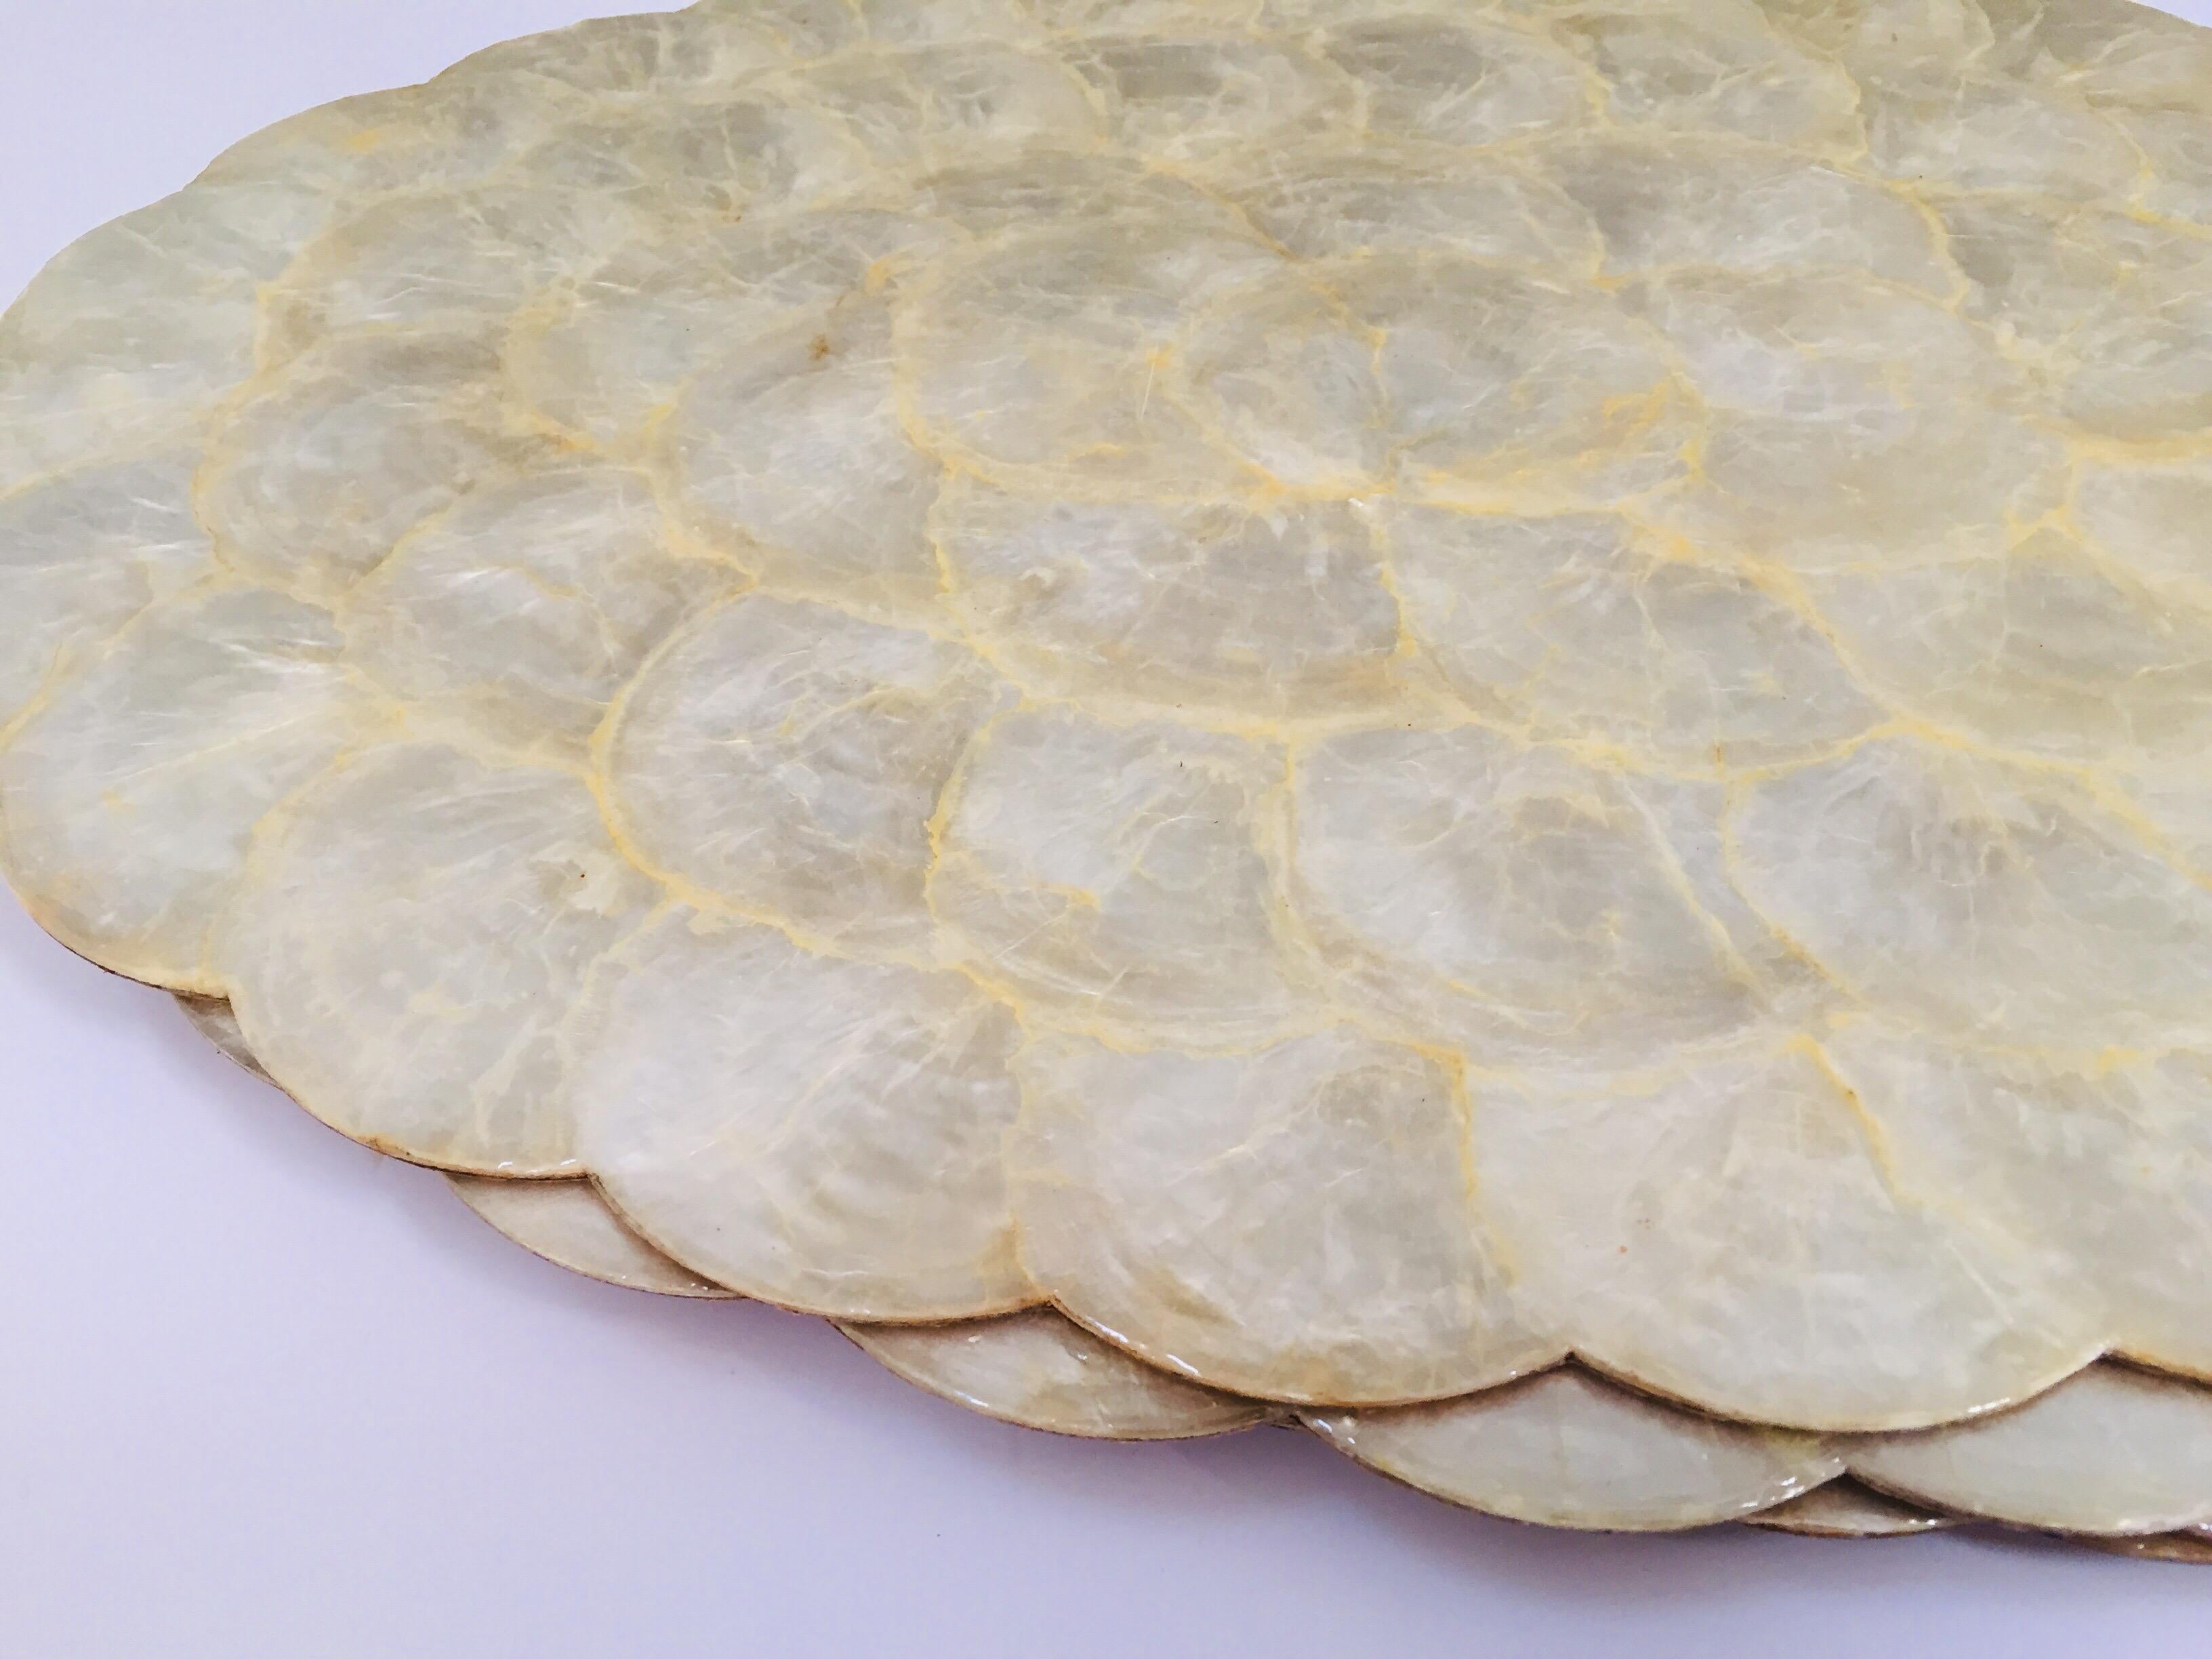 Bohemian Handcrafted Six Placemats in Natural Capiz Pearl Shell Scalloped Edge